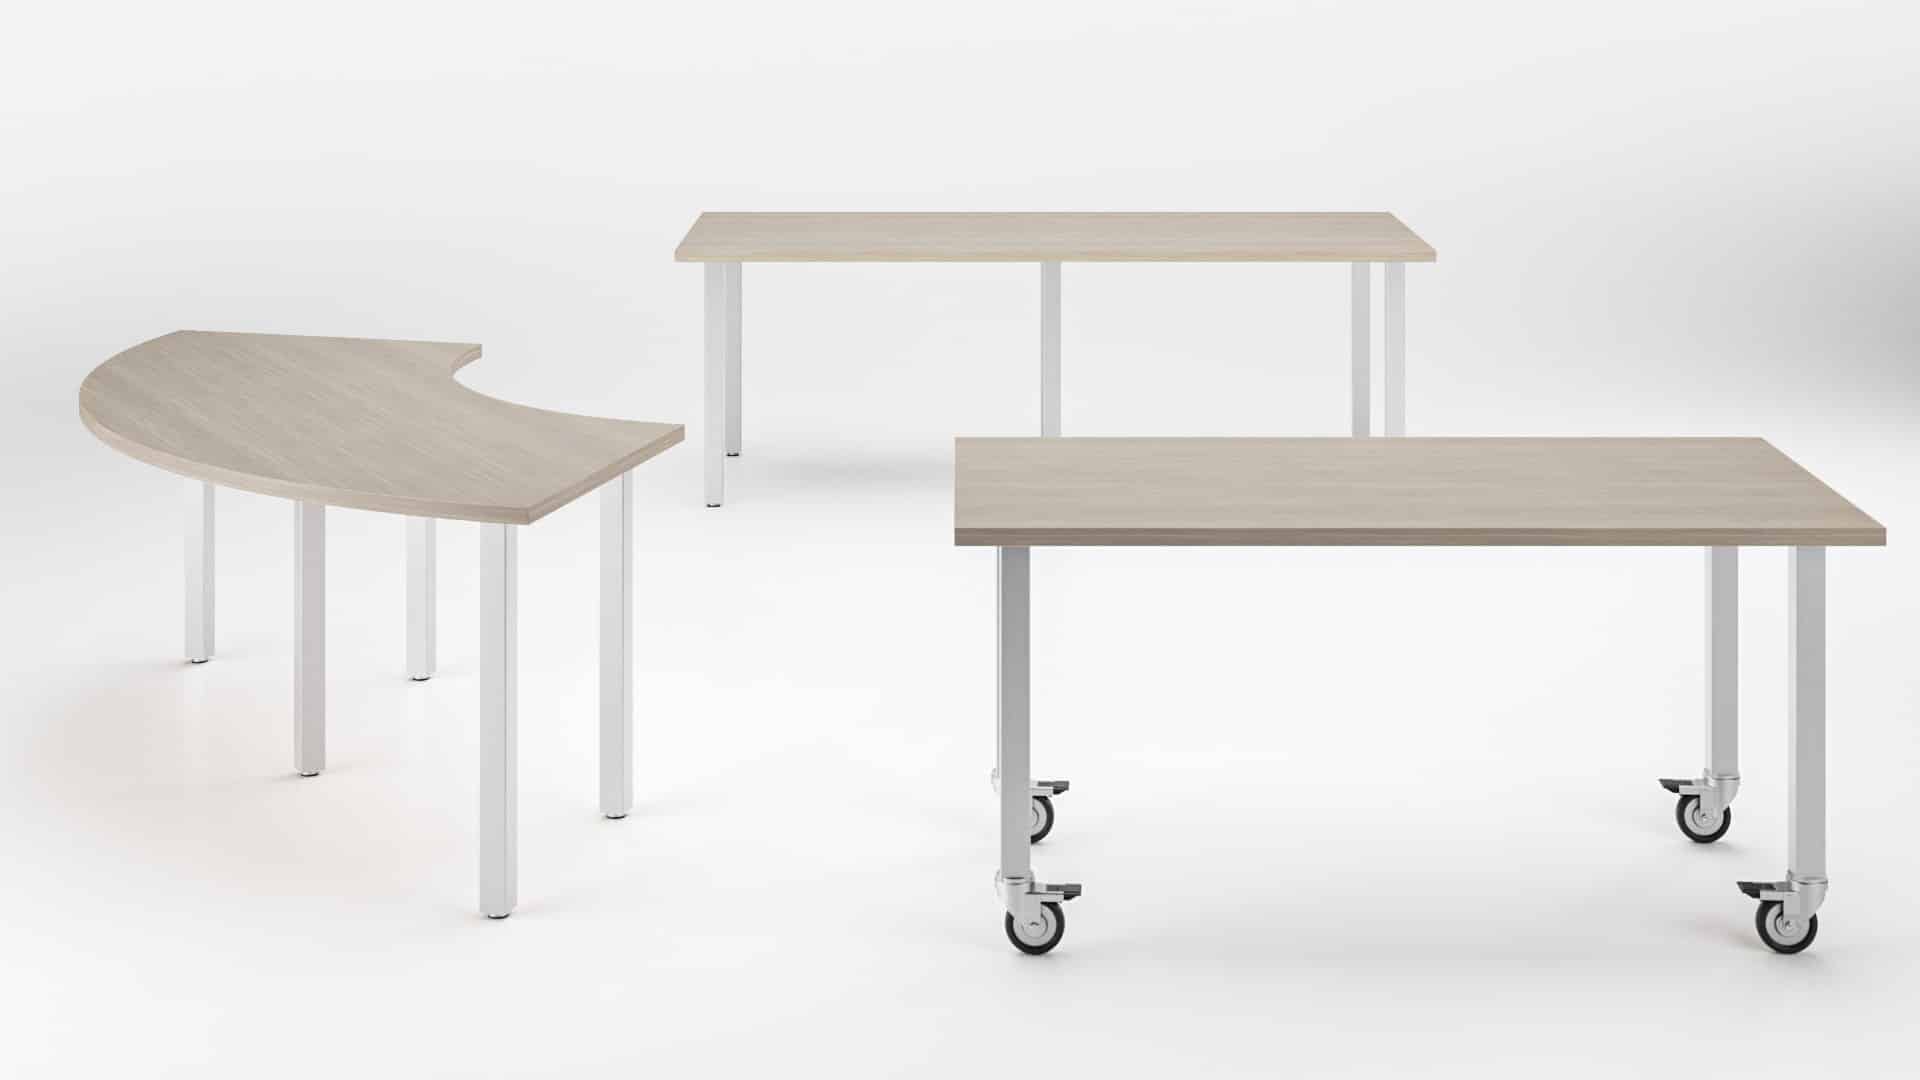 Coby Post training tables - rectangular and arch